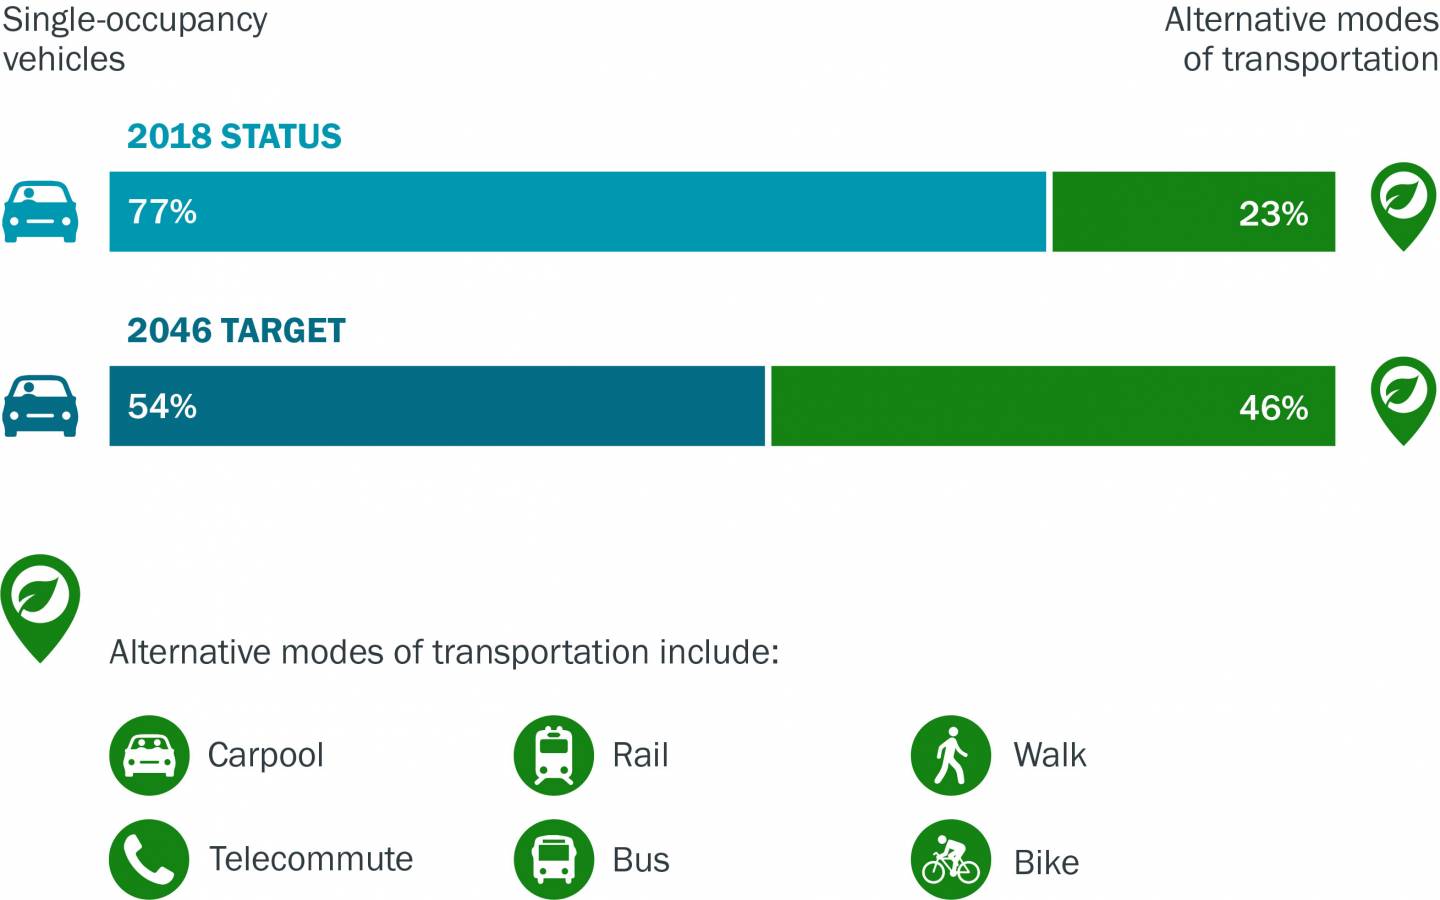 Graphic depicting sustainability efforts through transportation: A bar graph shows that in 2018 77% transportation is single occupancy vehicles and 23% alternative modes of transportation. Another bar graph shows a target of 54% single occupancy vehicles and 46% alternative modes of transporation in 2046.